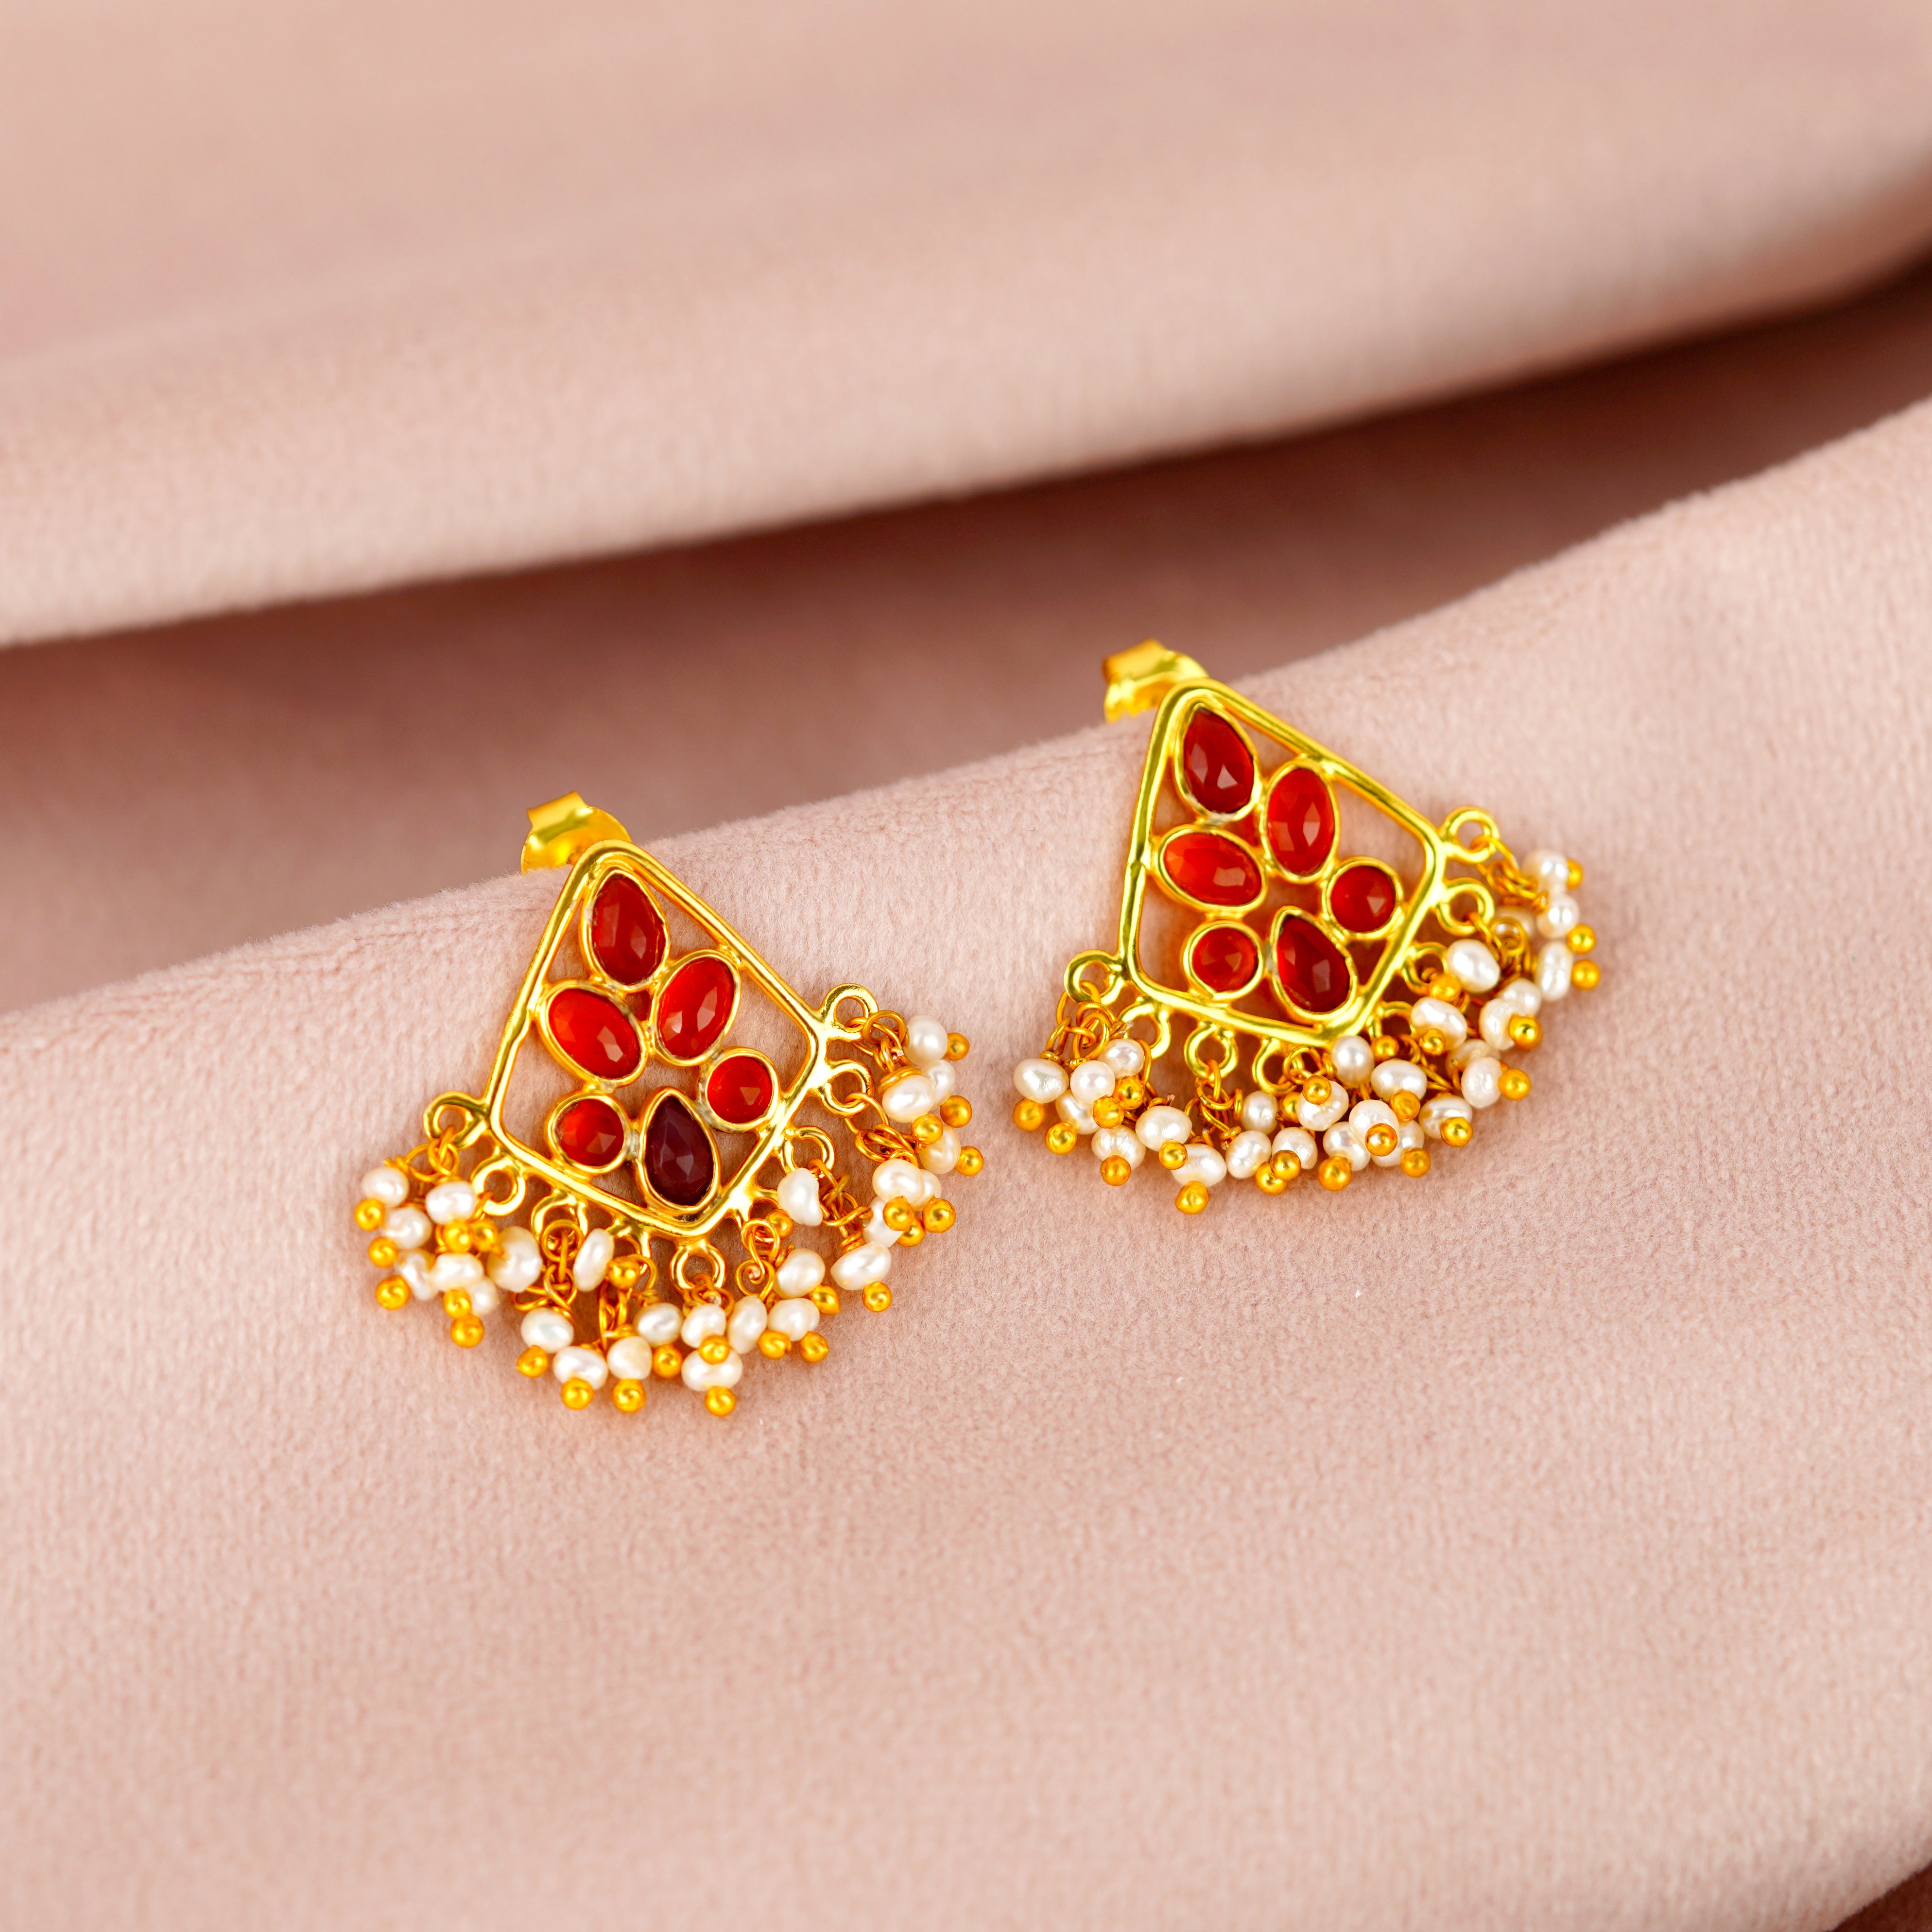 Pearl Blossom Earrings paired with colored stones - Krishna Jewellers Pearls and Gems